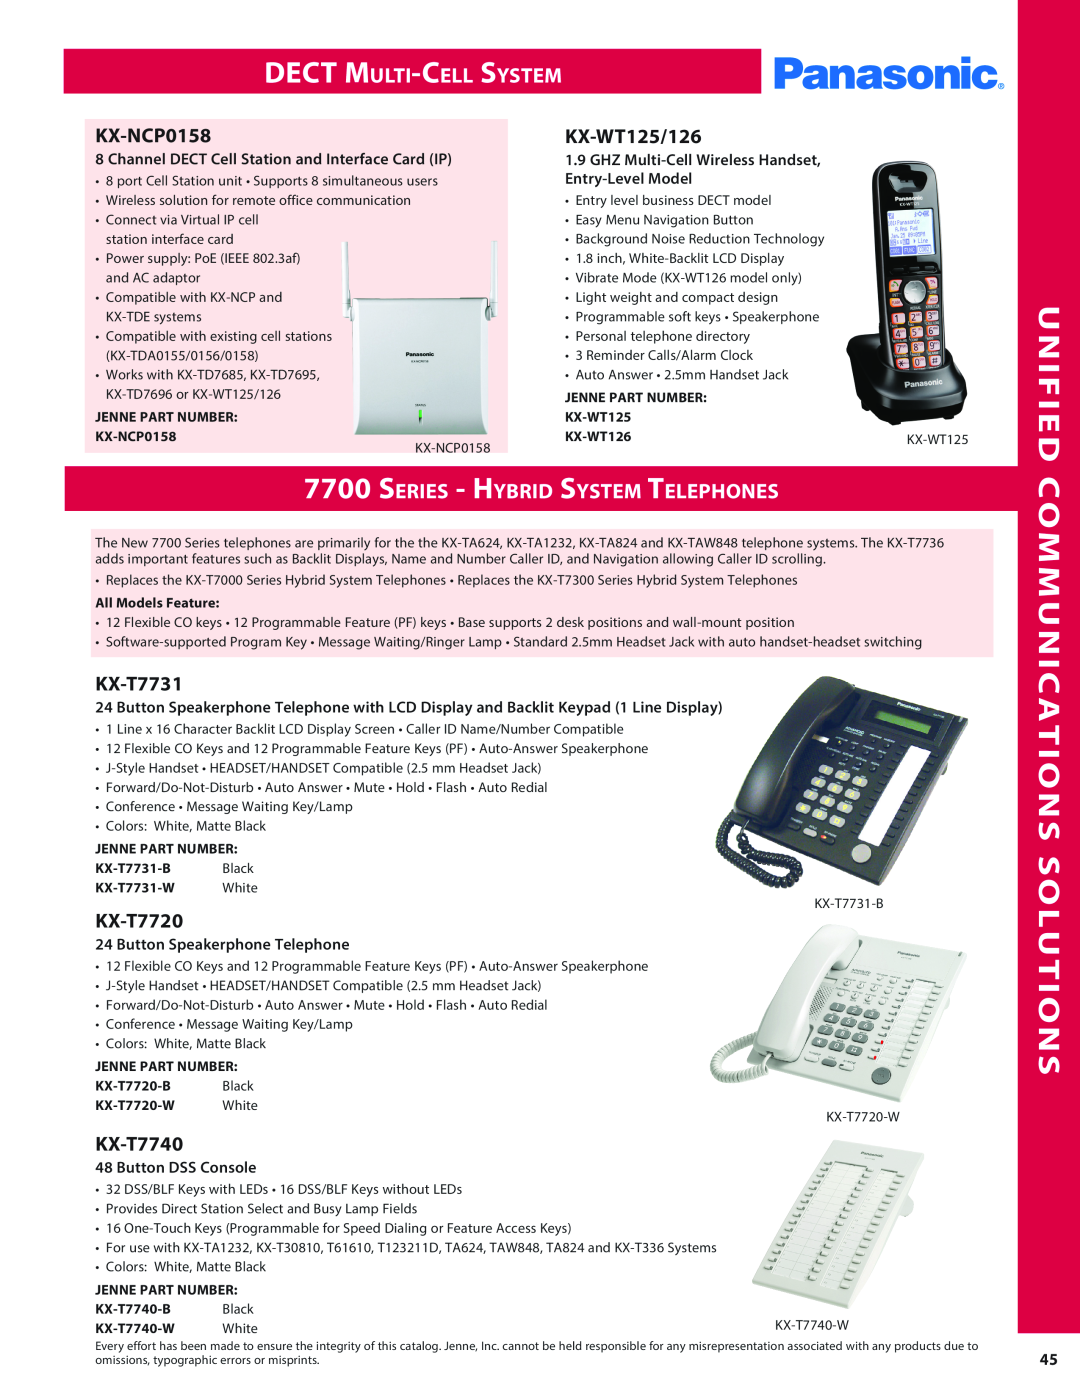 Panasonic PMPU2000 manual Solutions, Series - Hybrid System Telephones, Unified Communications, DECT Multi-Cell System 